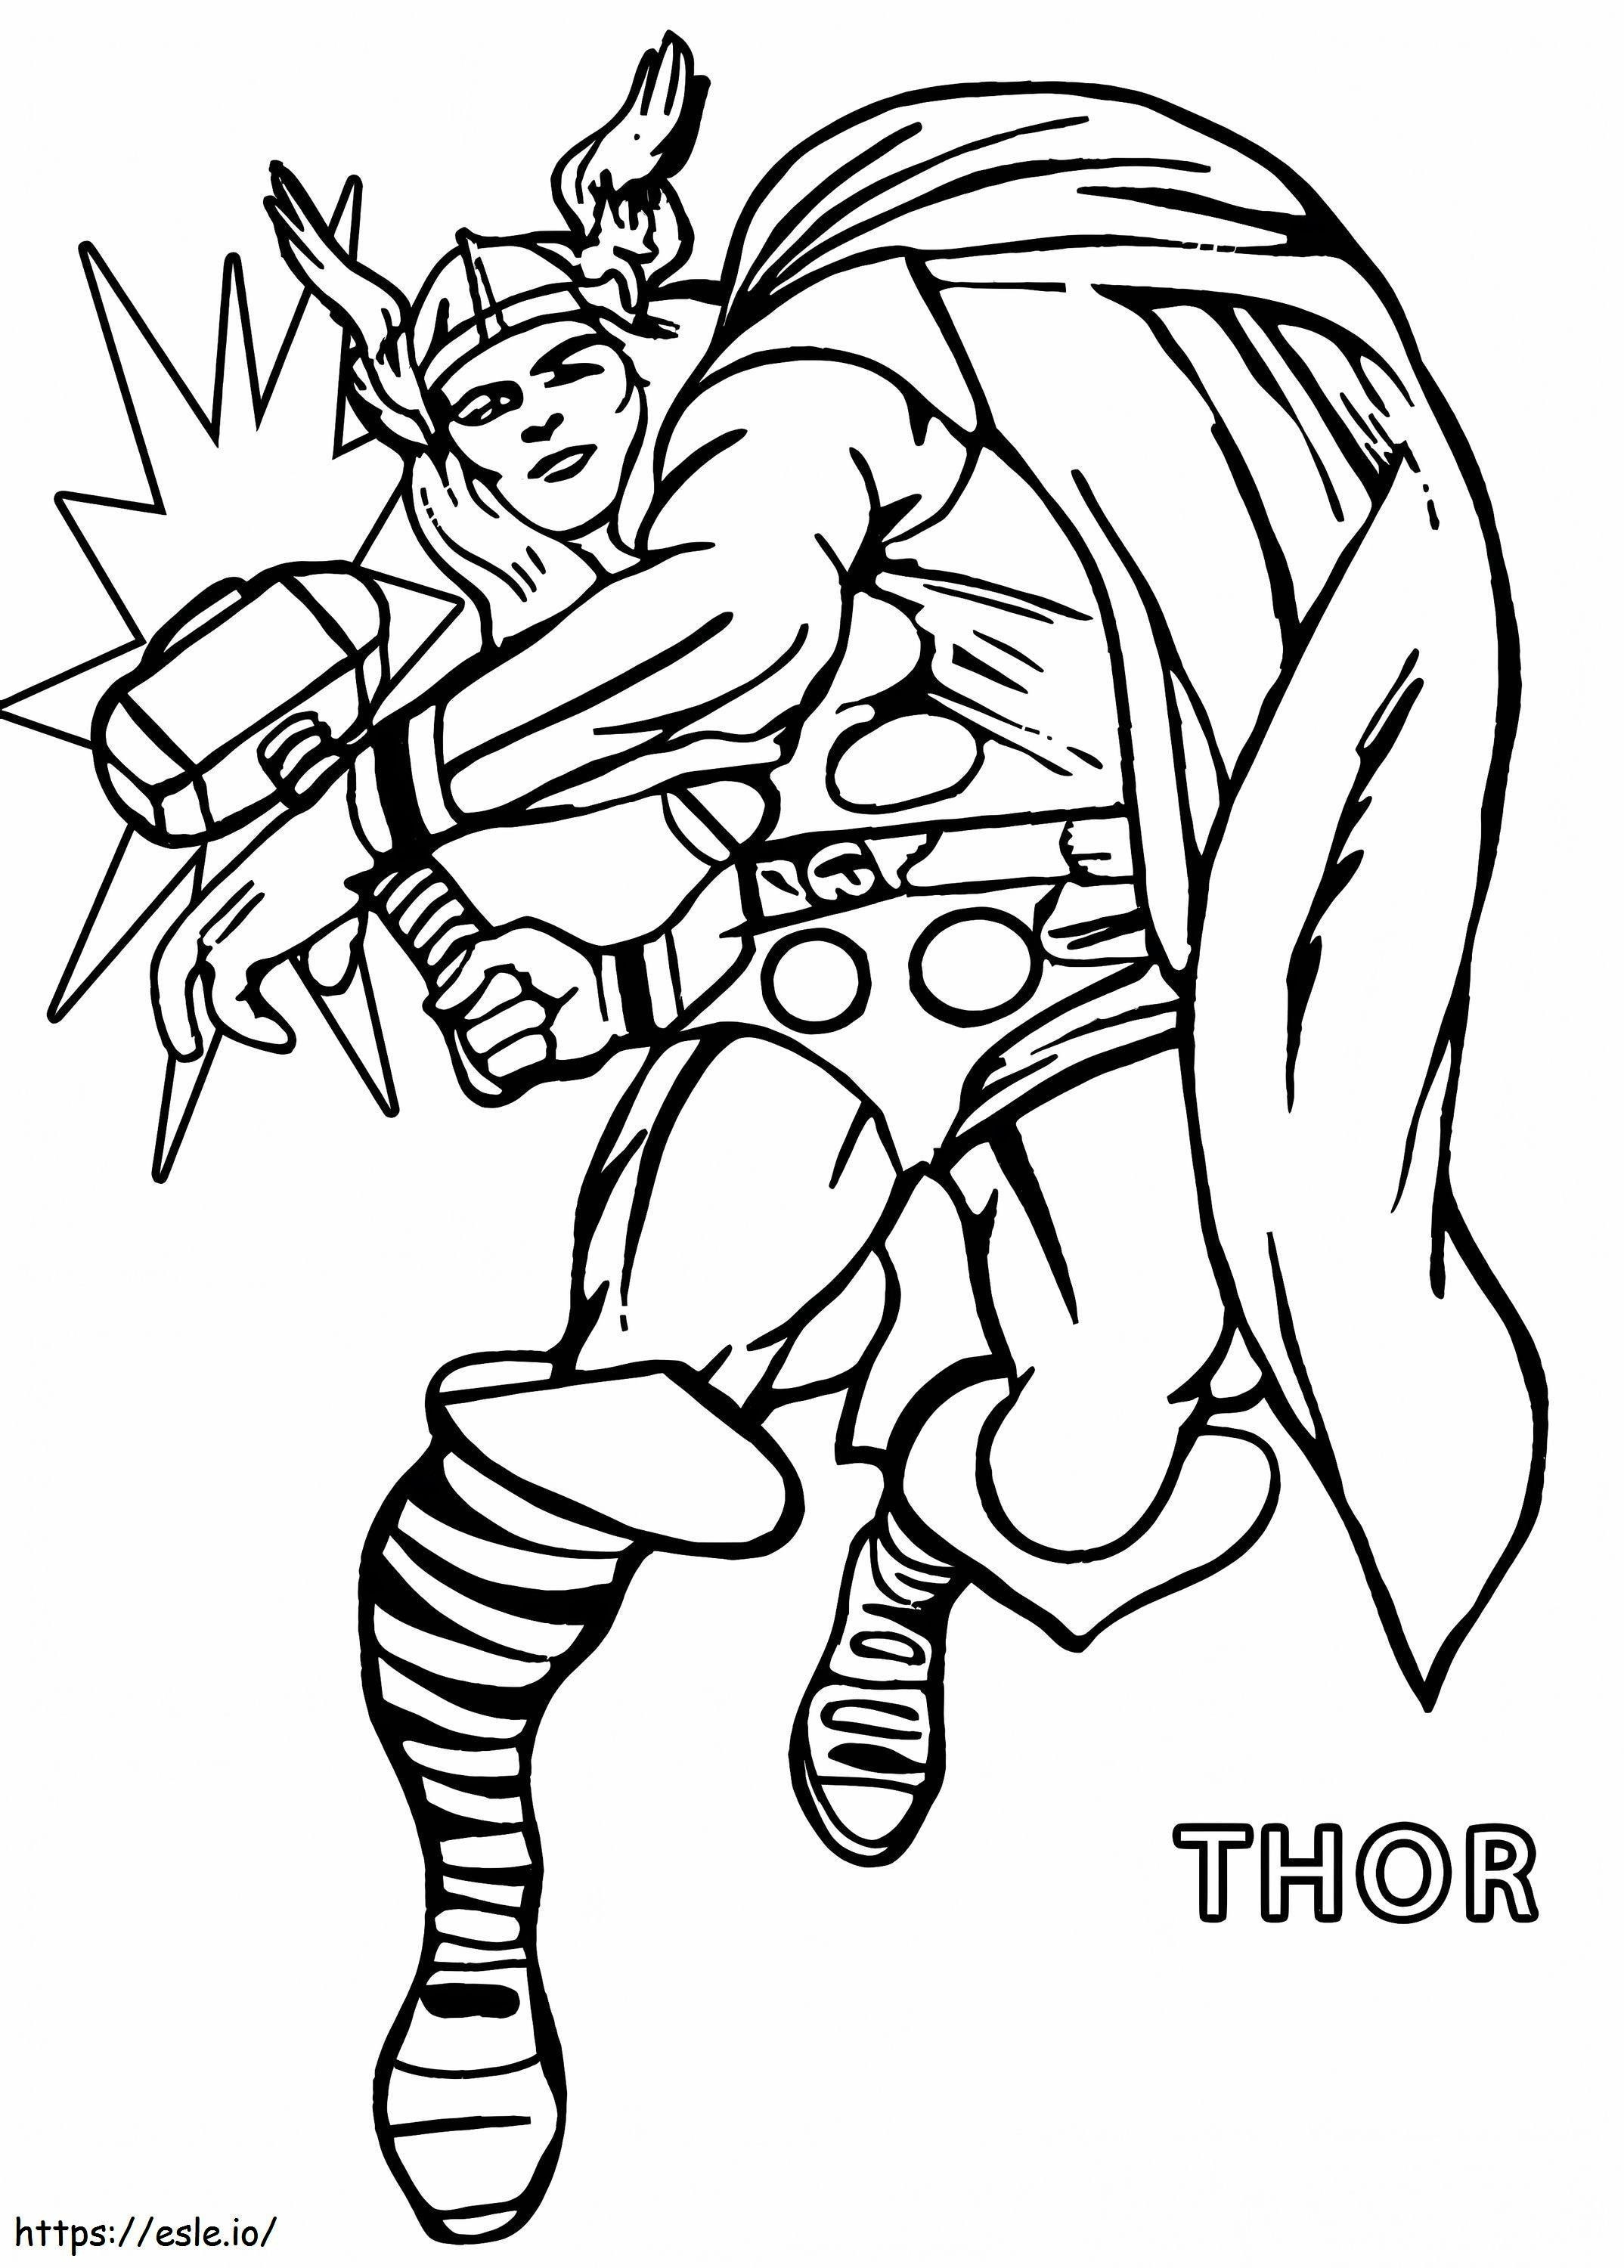 Thor Attacked coloring page